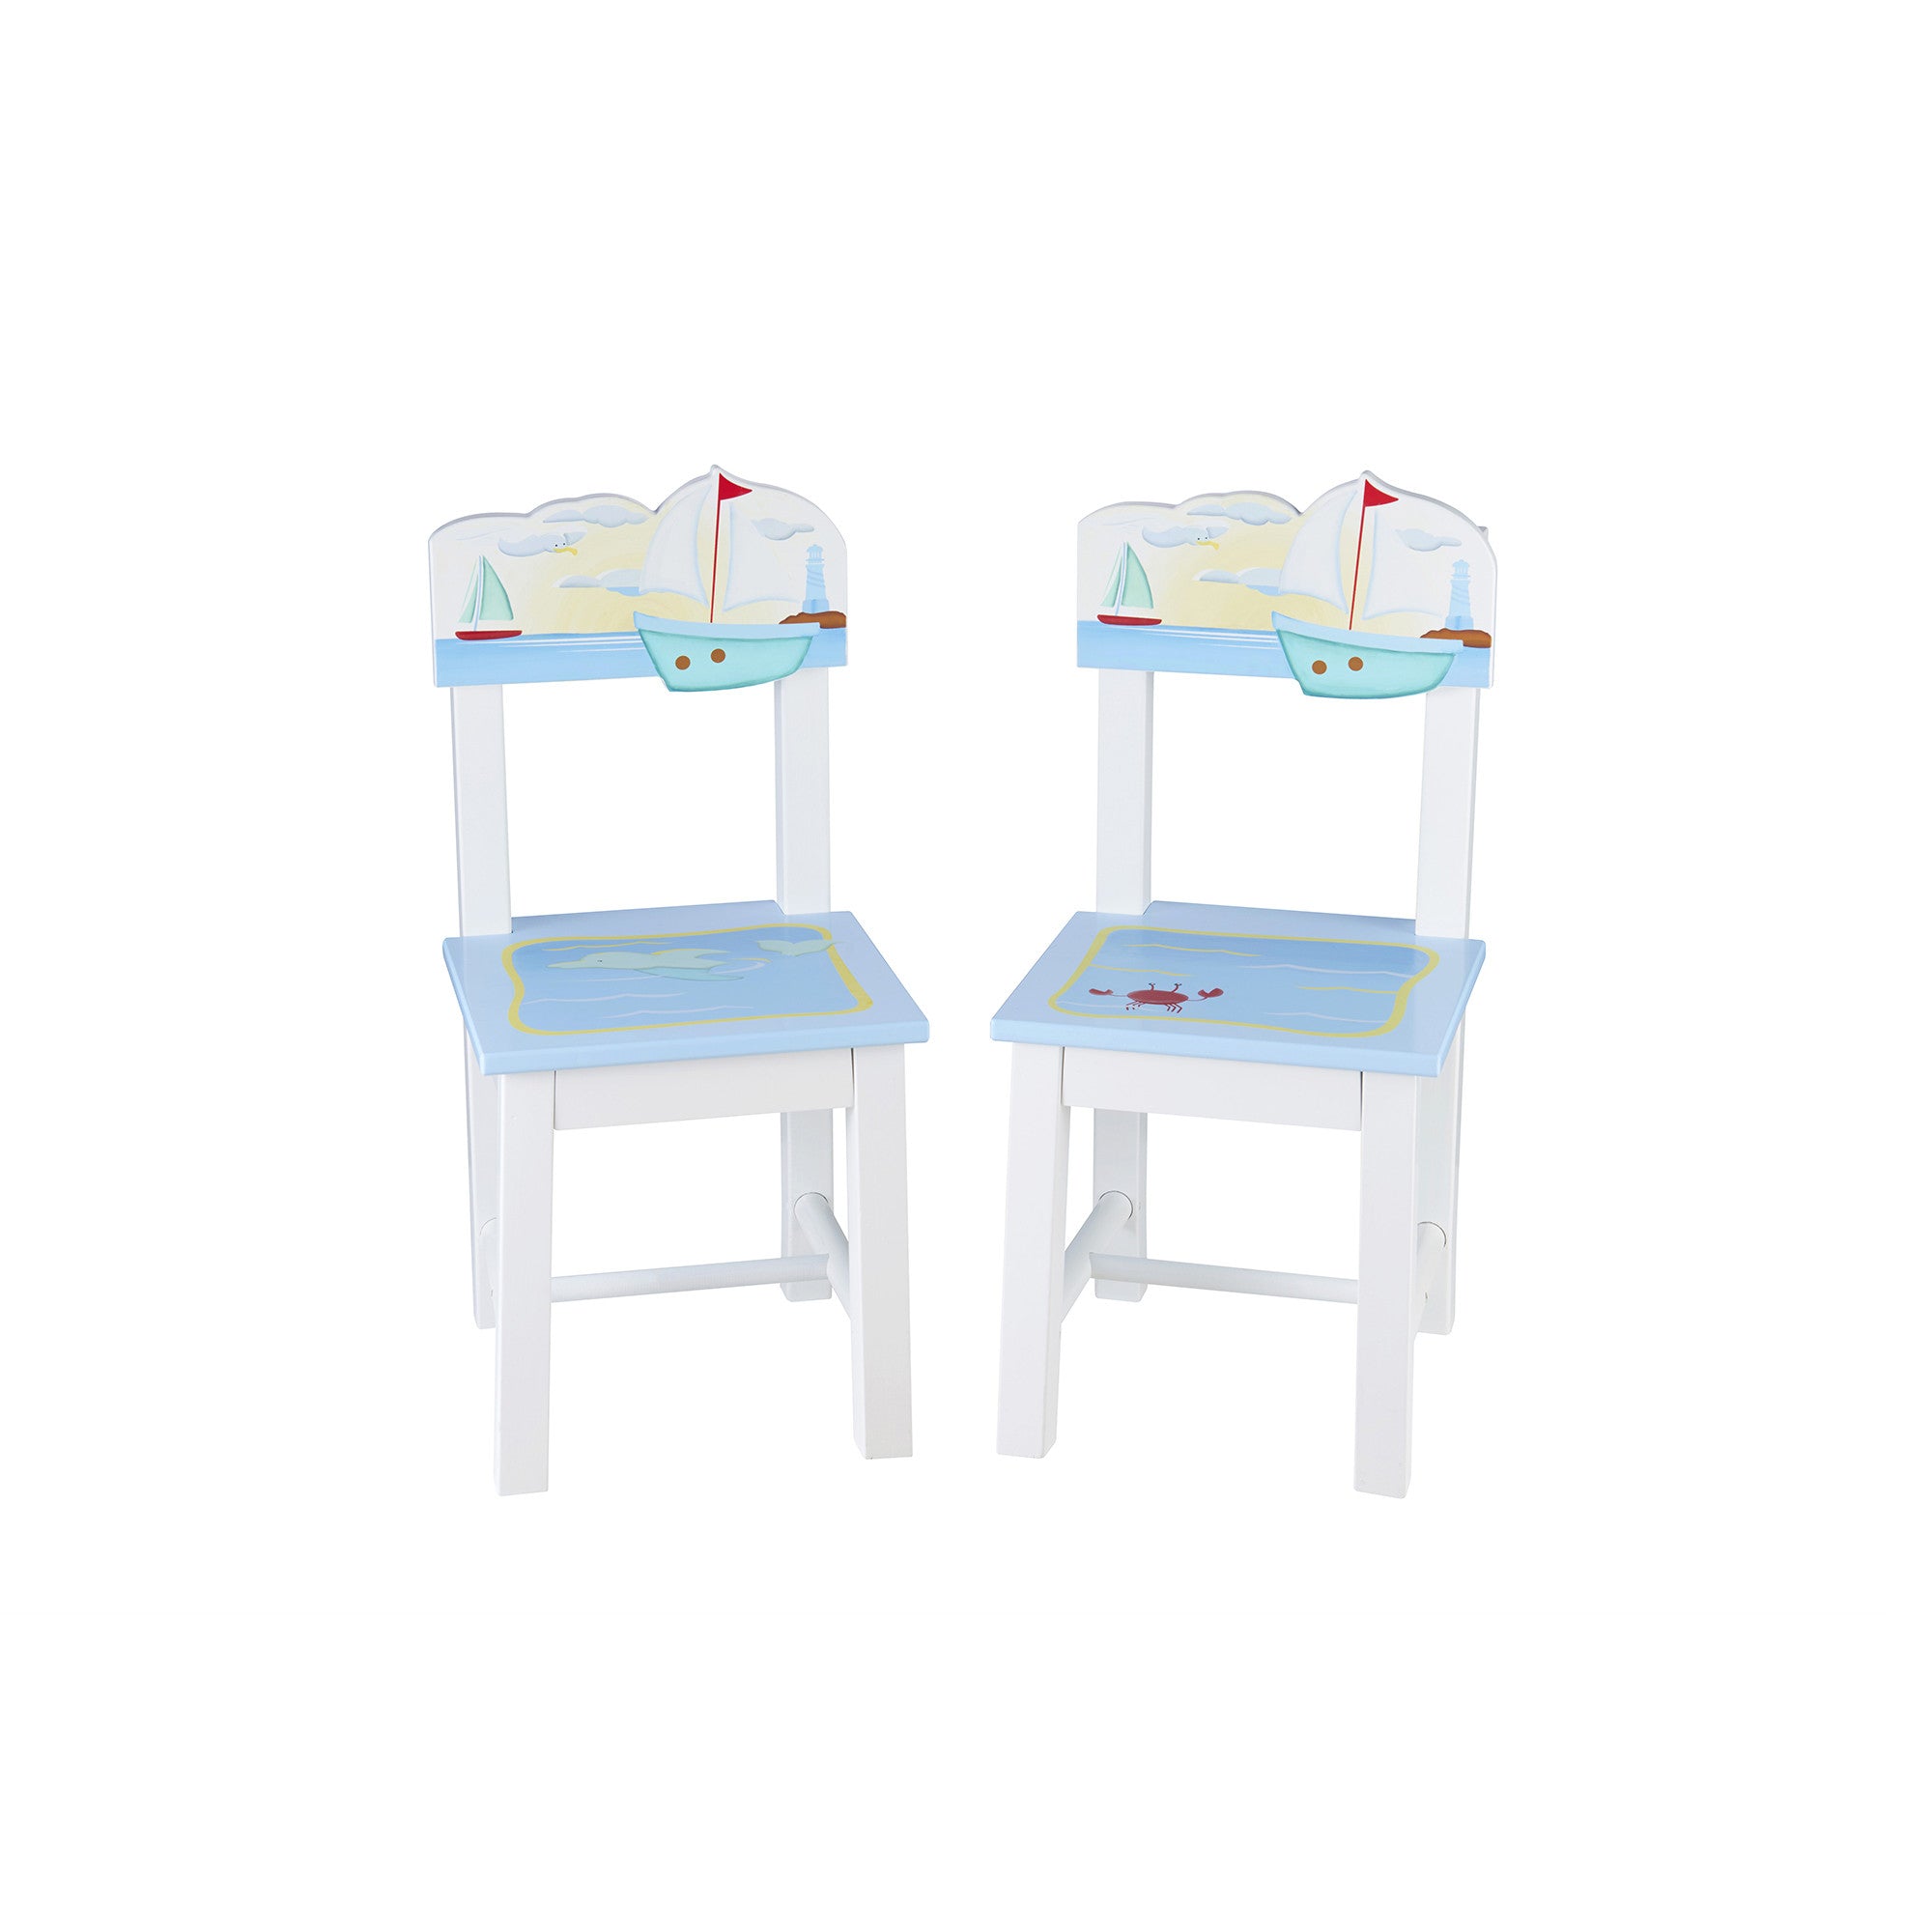 Guidecraft Sailing Table & Chairs Set G88202